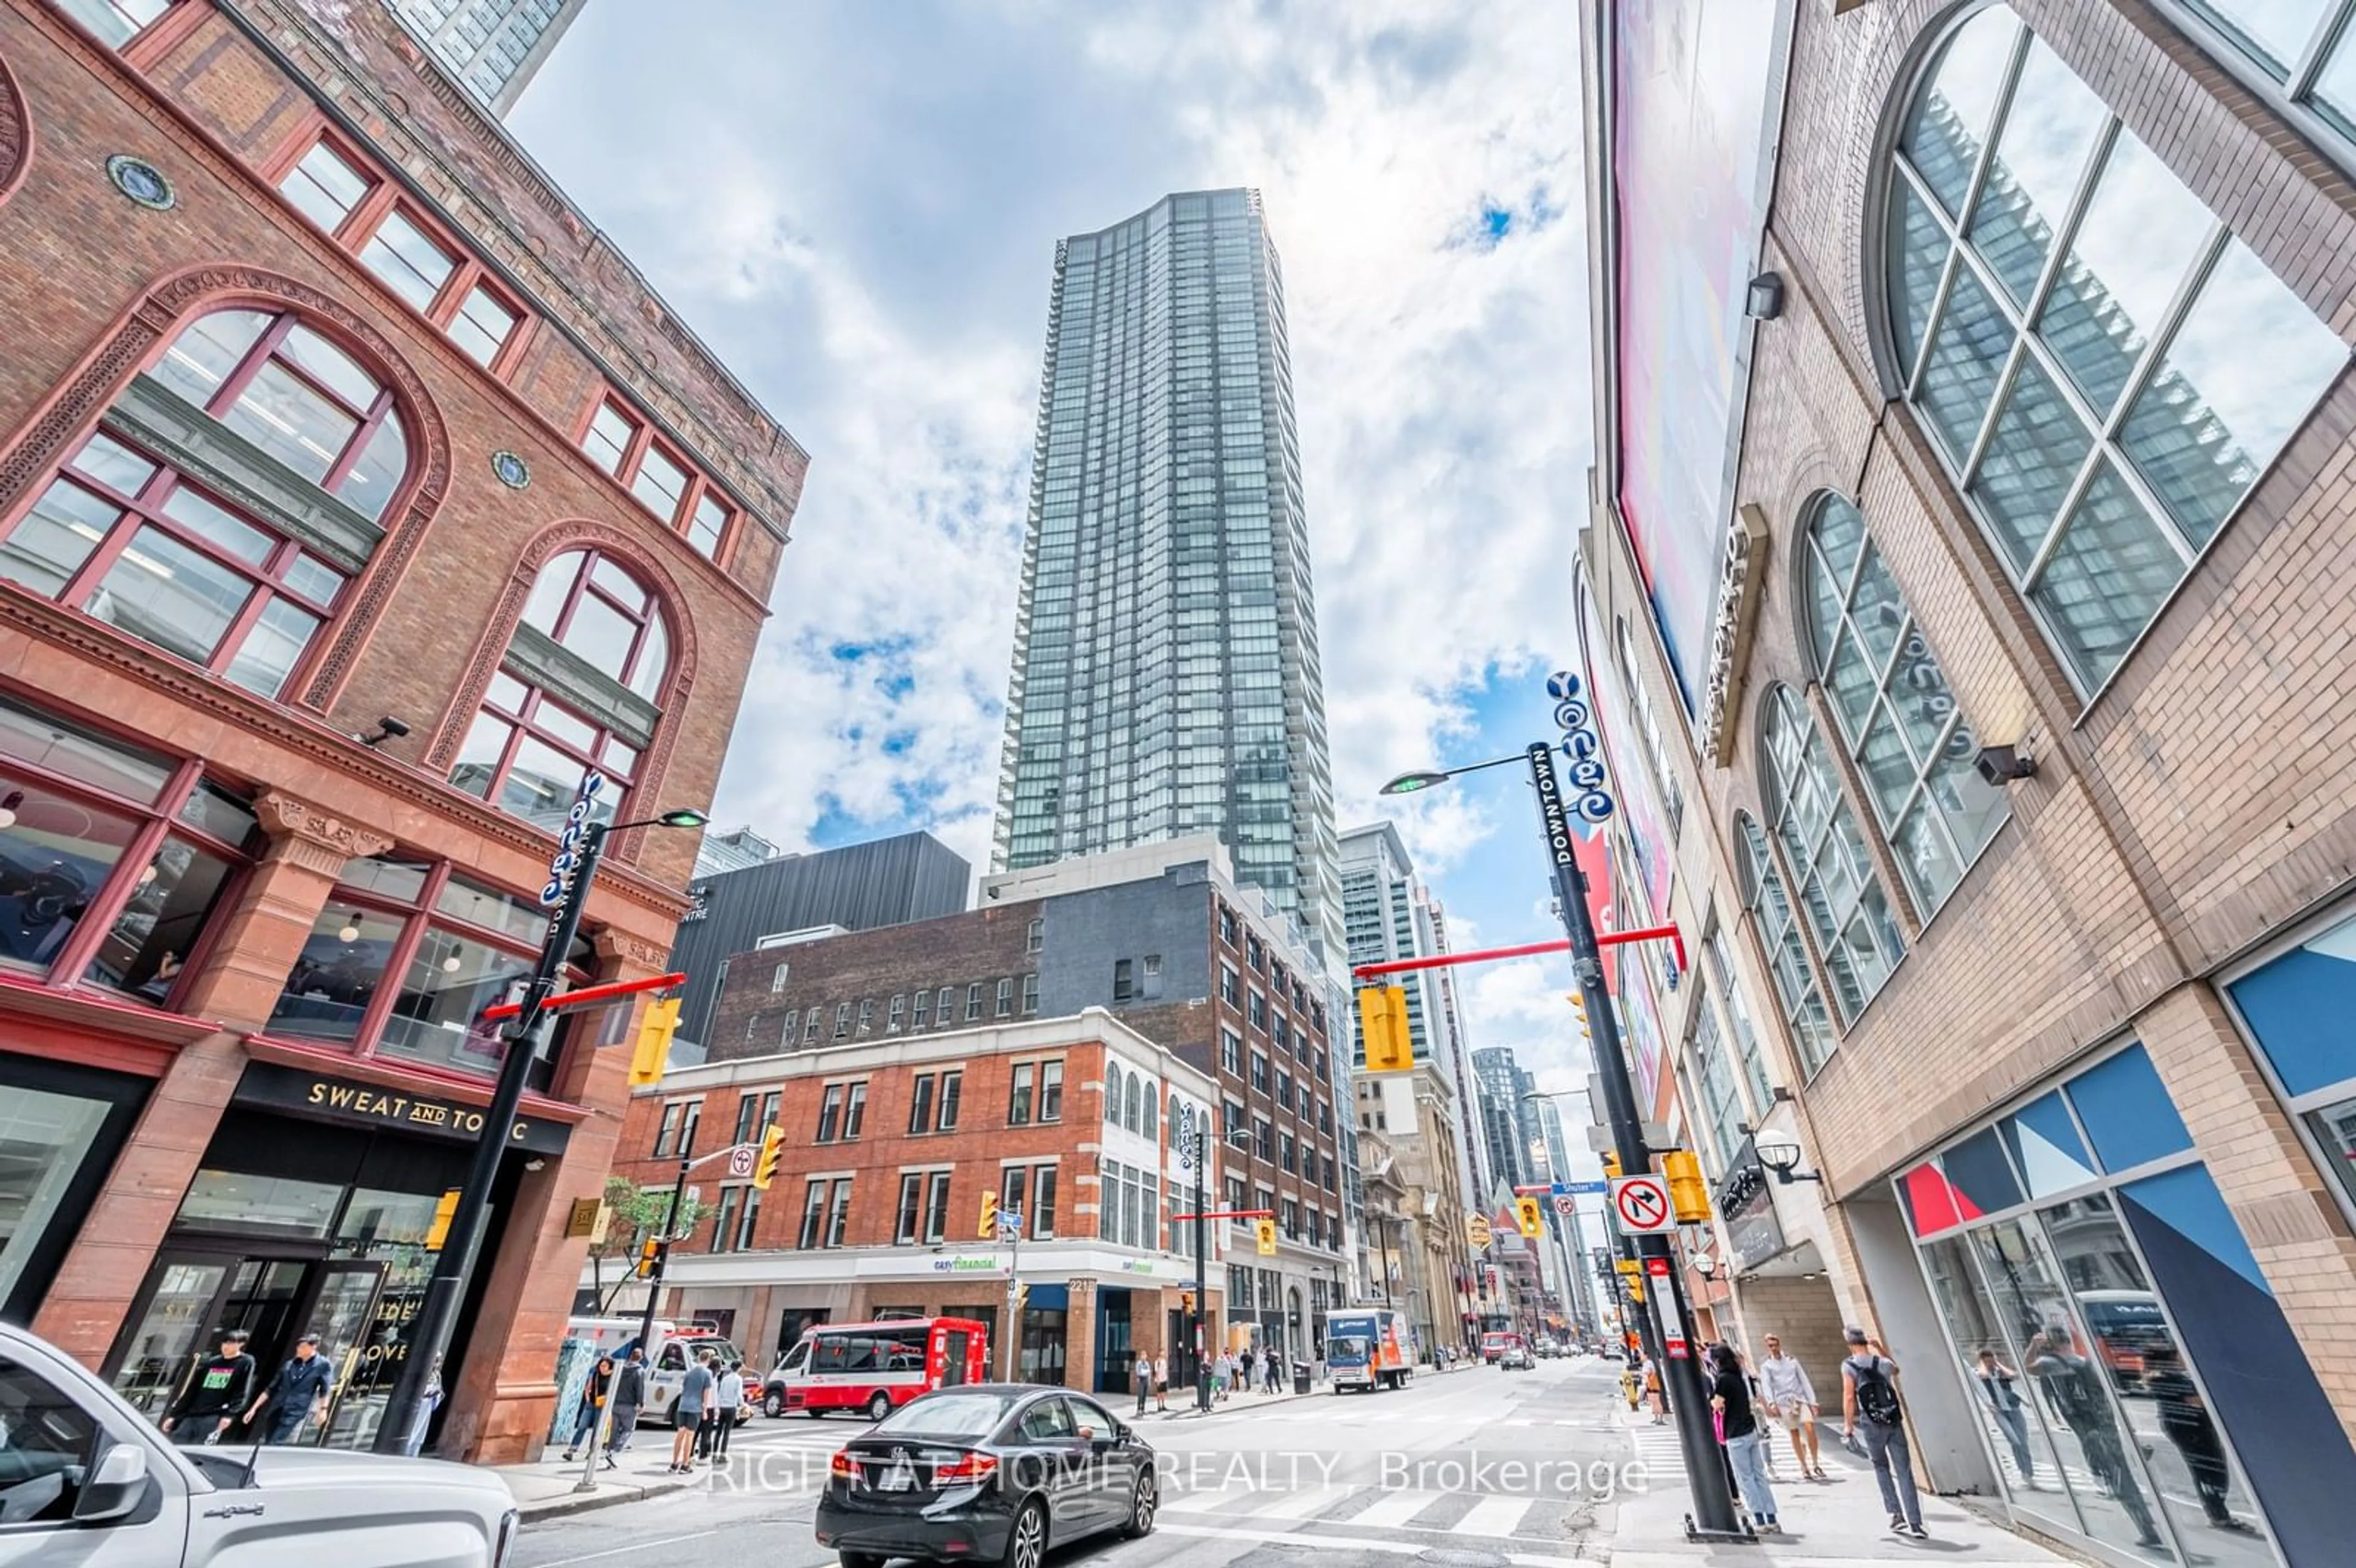 A view of a street for 197 Yonge St #1204, Toronto Ontario M5B 1M4